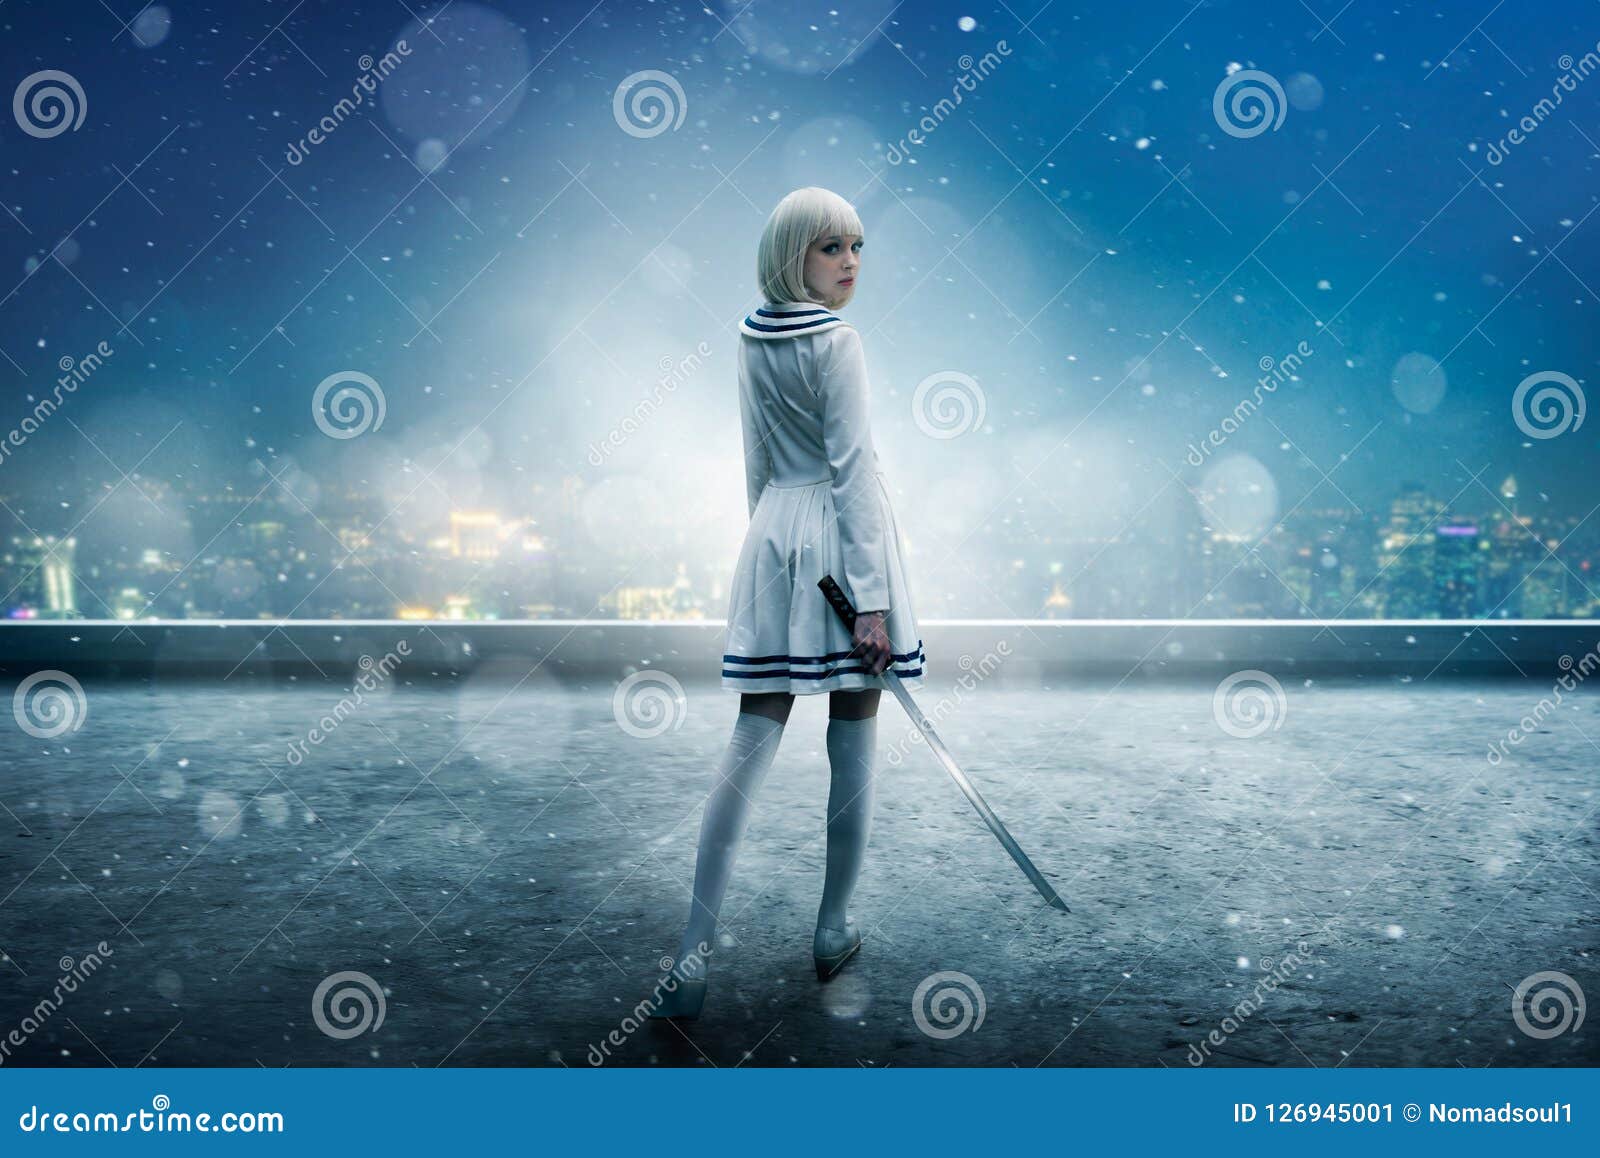 Anime Girl on Snowy Edge of Skyscraper Roof Stock Image - Image of  background, hairstyle: 126945001